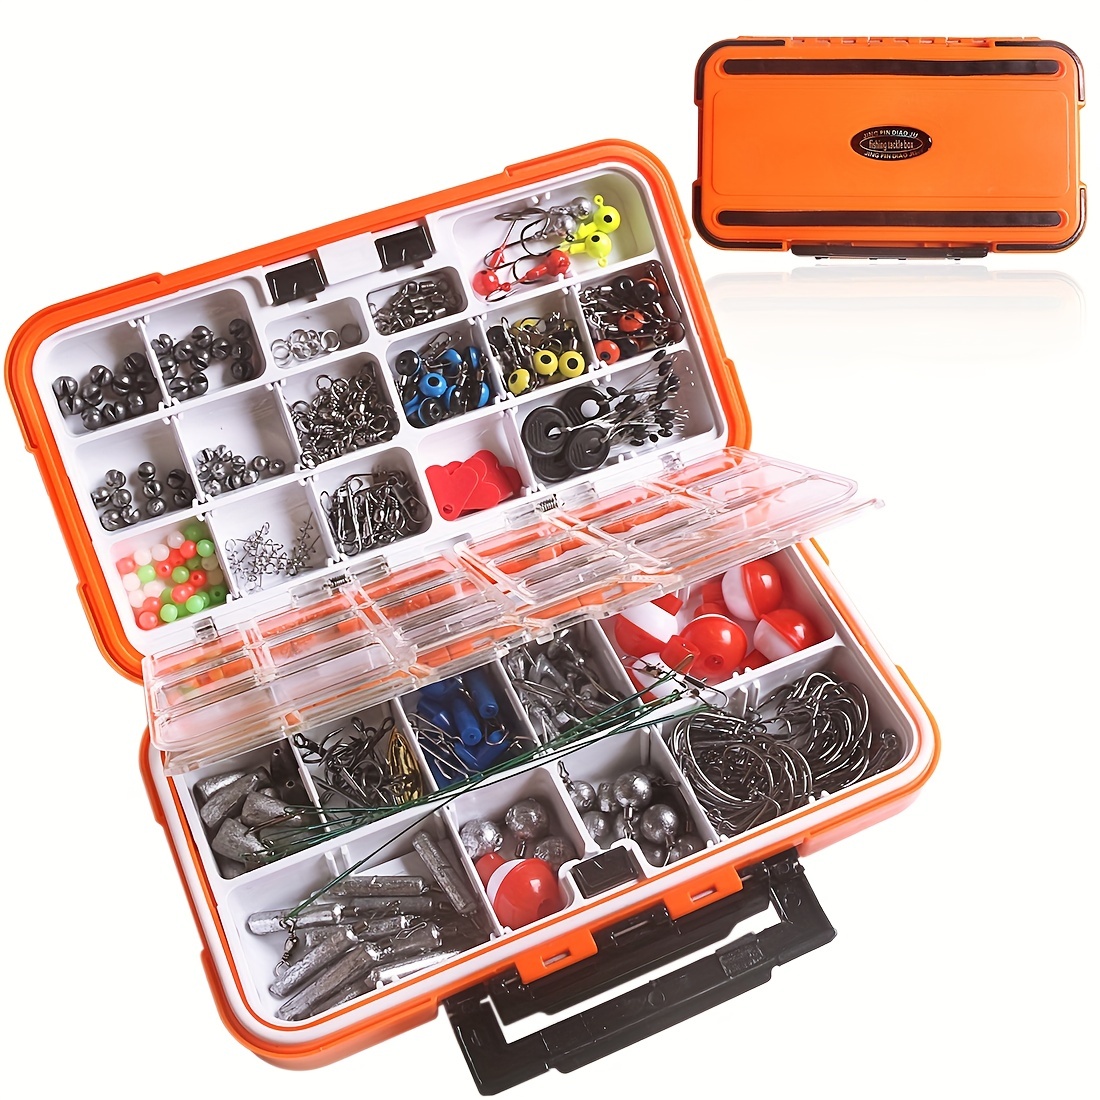 TRUSCEND 203pcs Fishing Accessories Kit, Premium Fishing Tackle Box  Including Fishing Hooks/Fishing Leader/Swivels Snaps/Weights